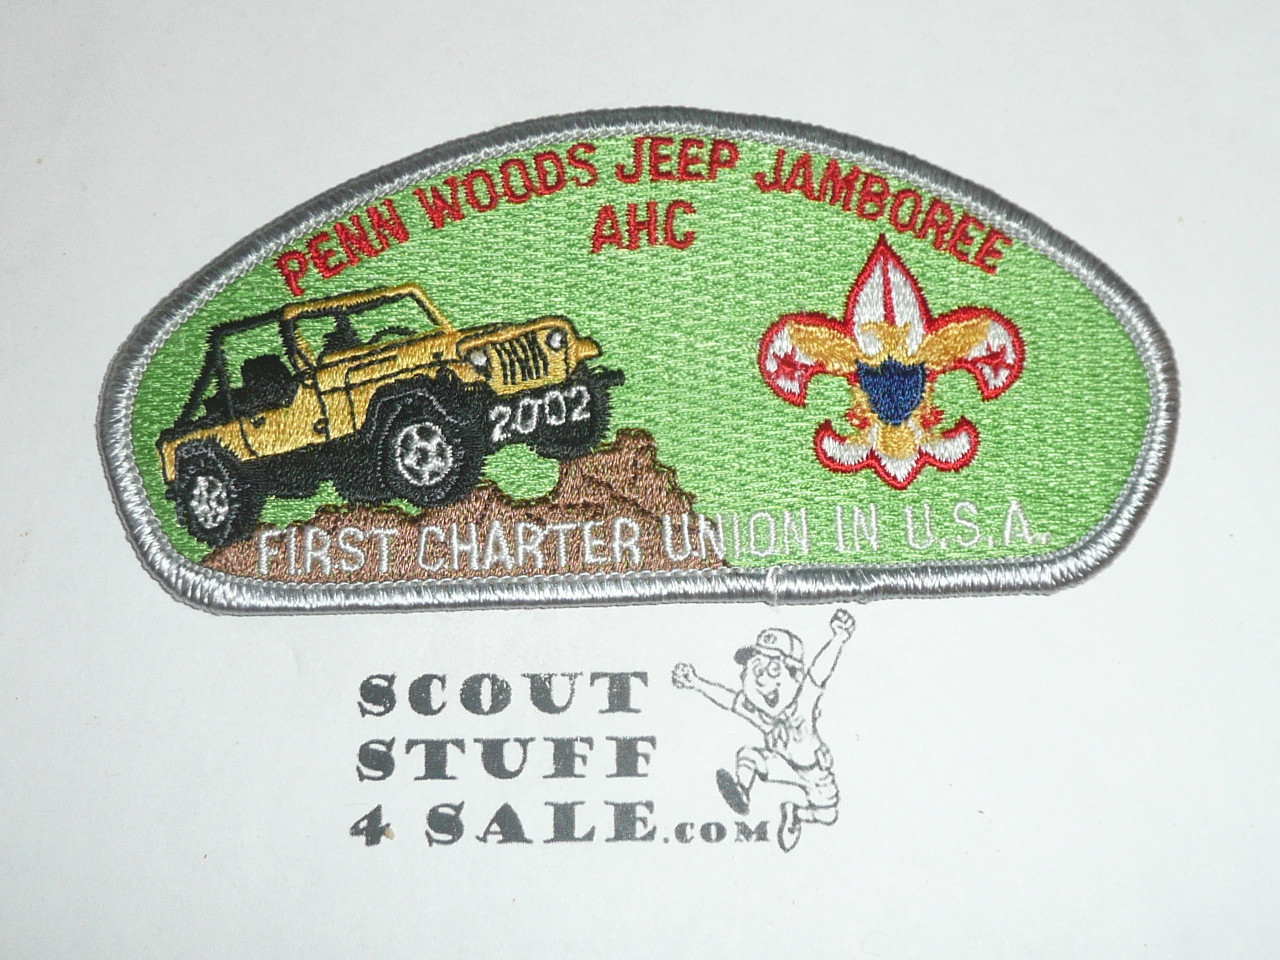 Allegheny Highlands Council sa29 CSP - 2002 Penn's Woods Jeep Jamboree